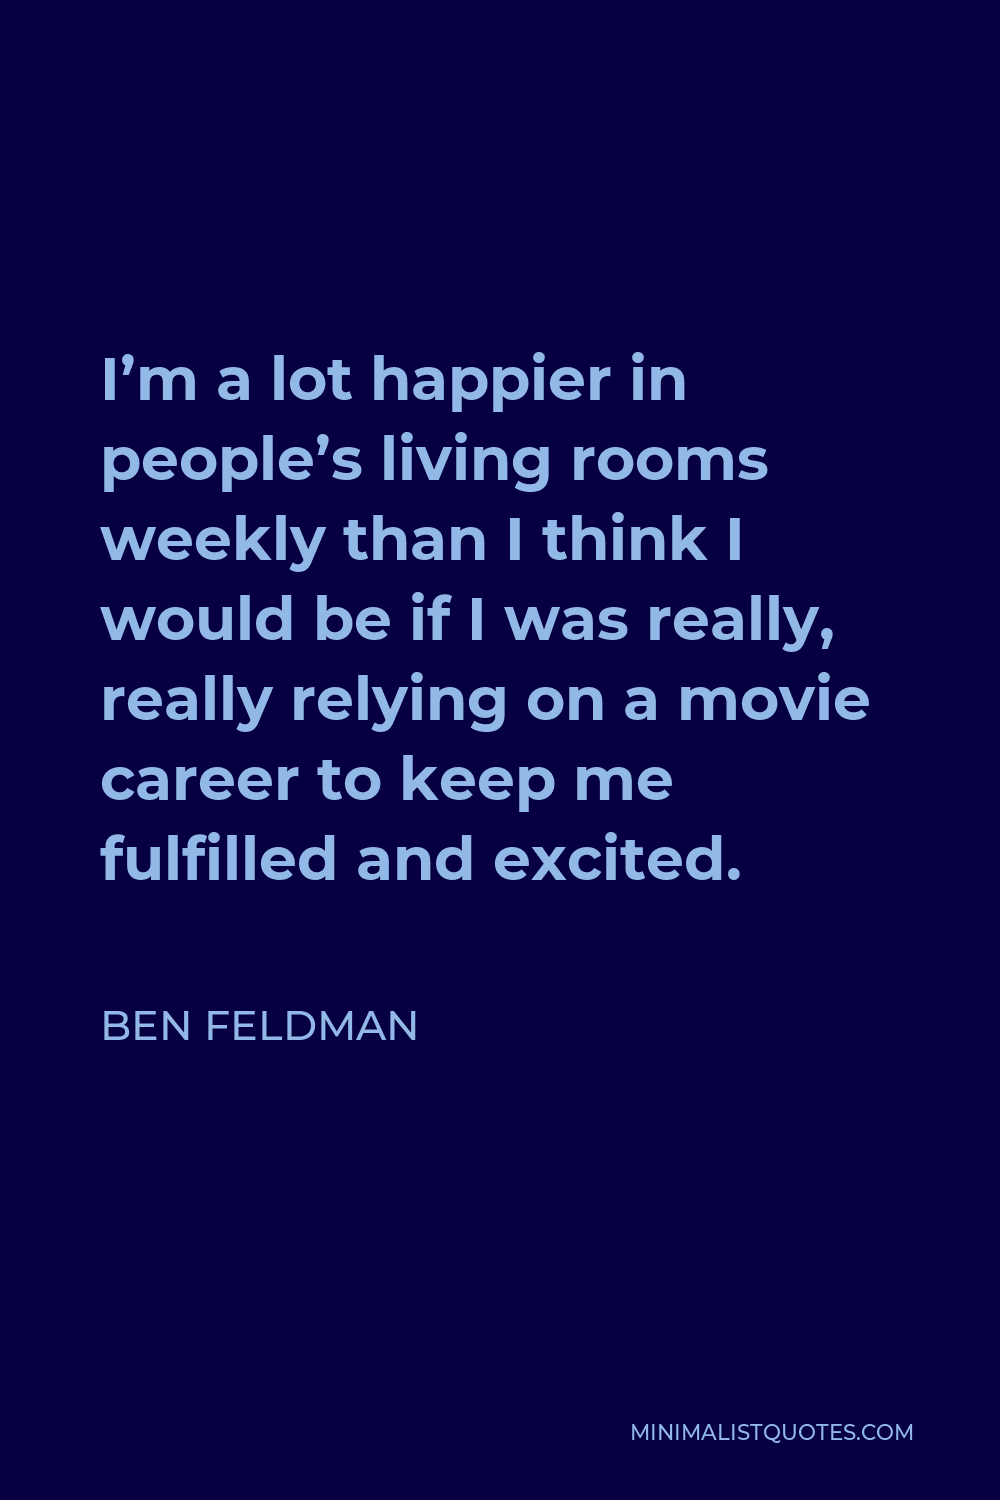 Ben Feldman Quote - I’m a lot happier in people’s living rooms weekly than I think I would be if I was really, really relying on a movie career to keep me fulfilled and excited.